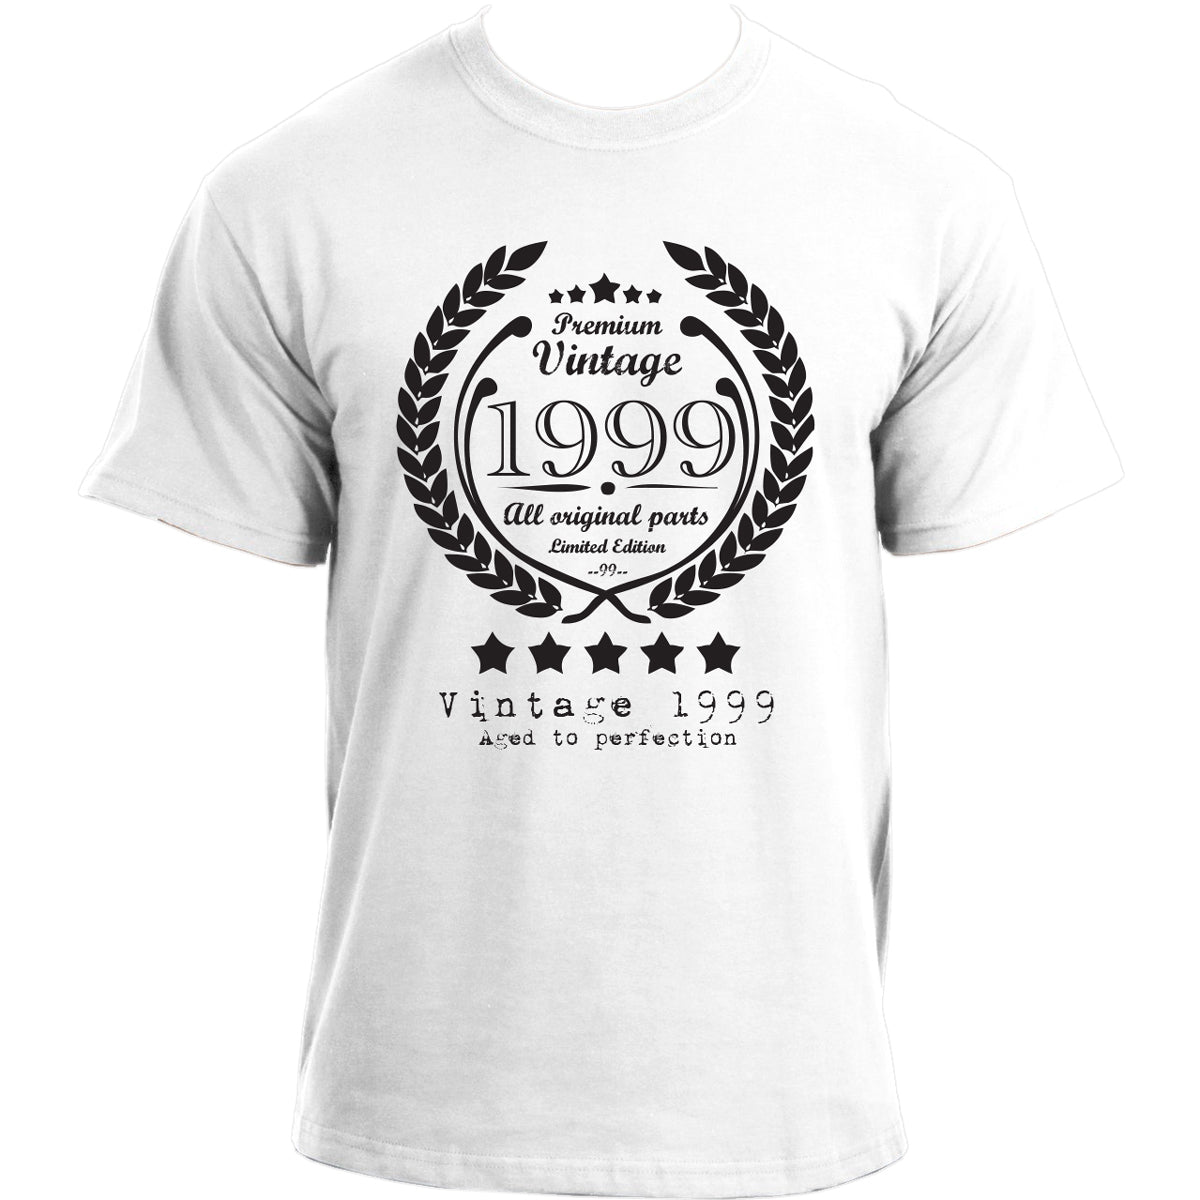 Premium Vintage 1999 Aged to Perfection Limited Edition Birthday Present Mens t-shirt